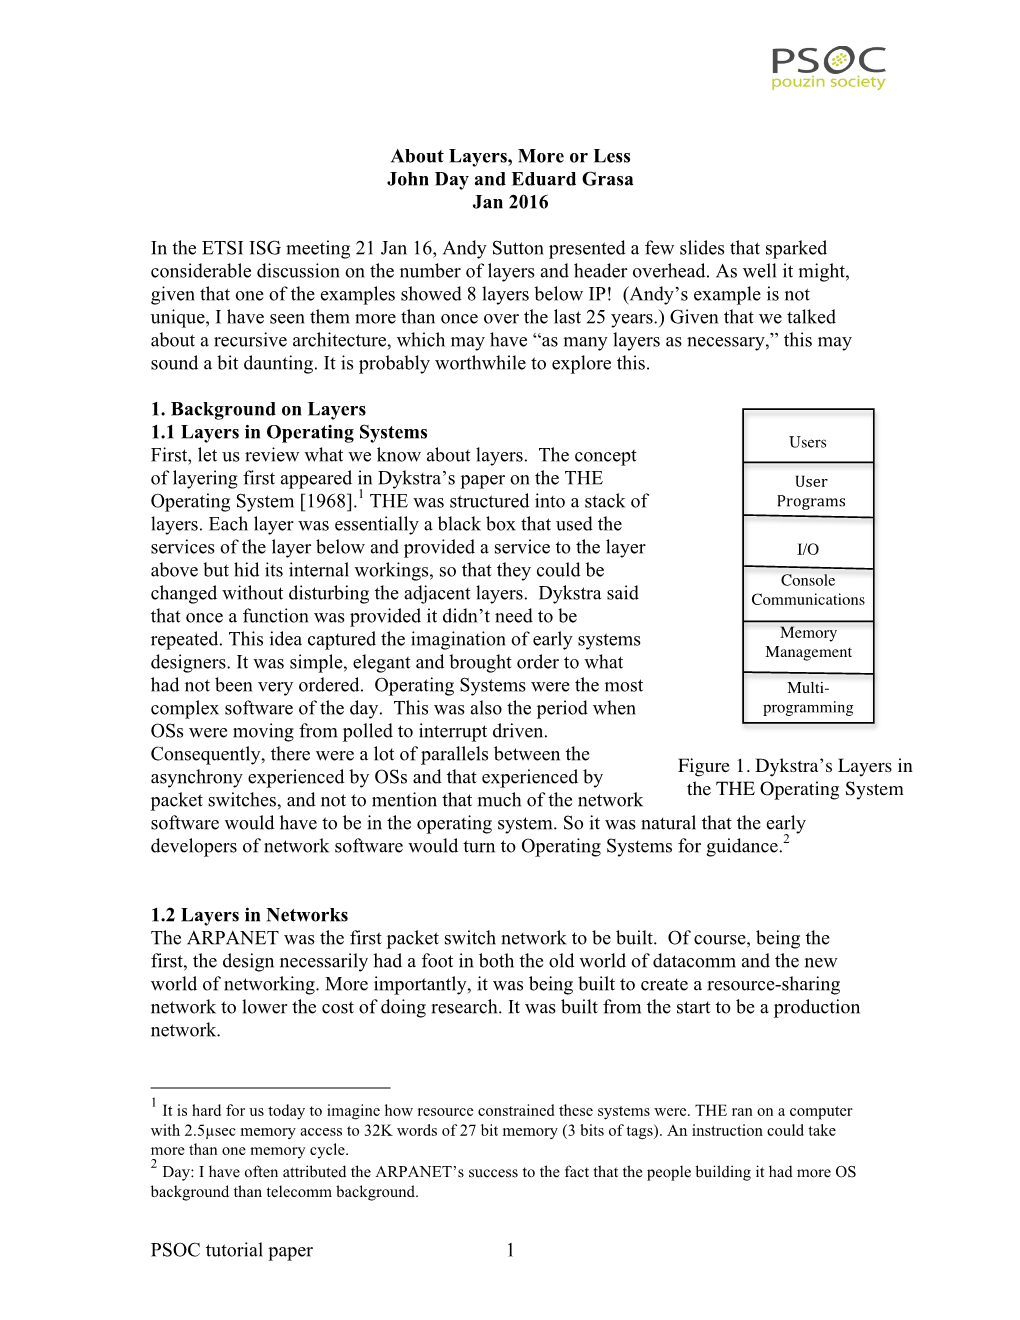 PSOC Tutorial Paper 1 About Layers, More Or Less John Day and Eduard